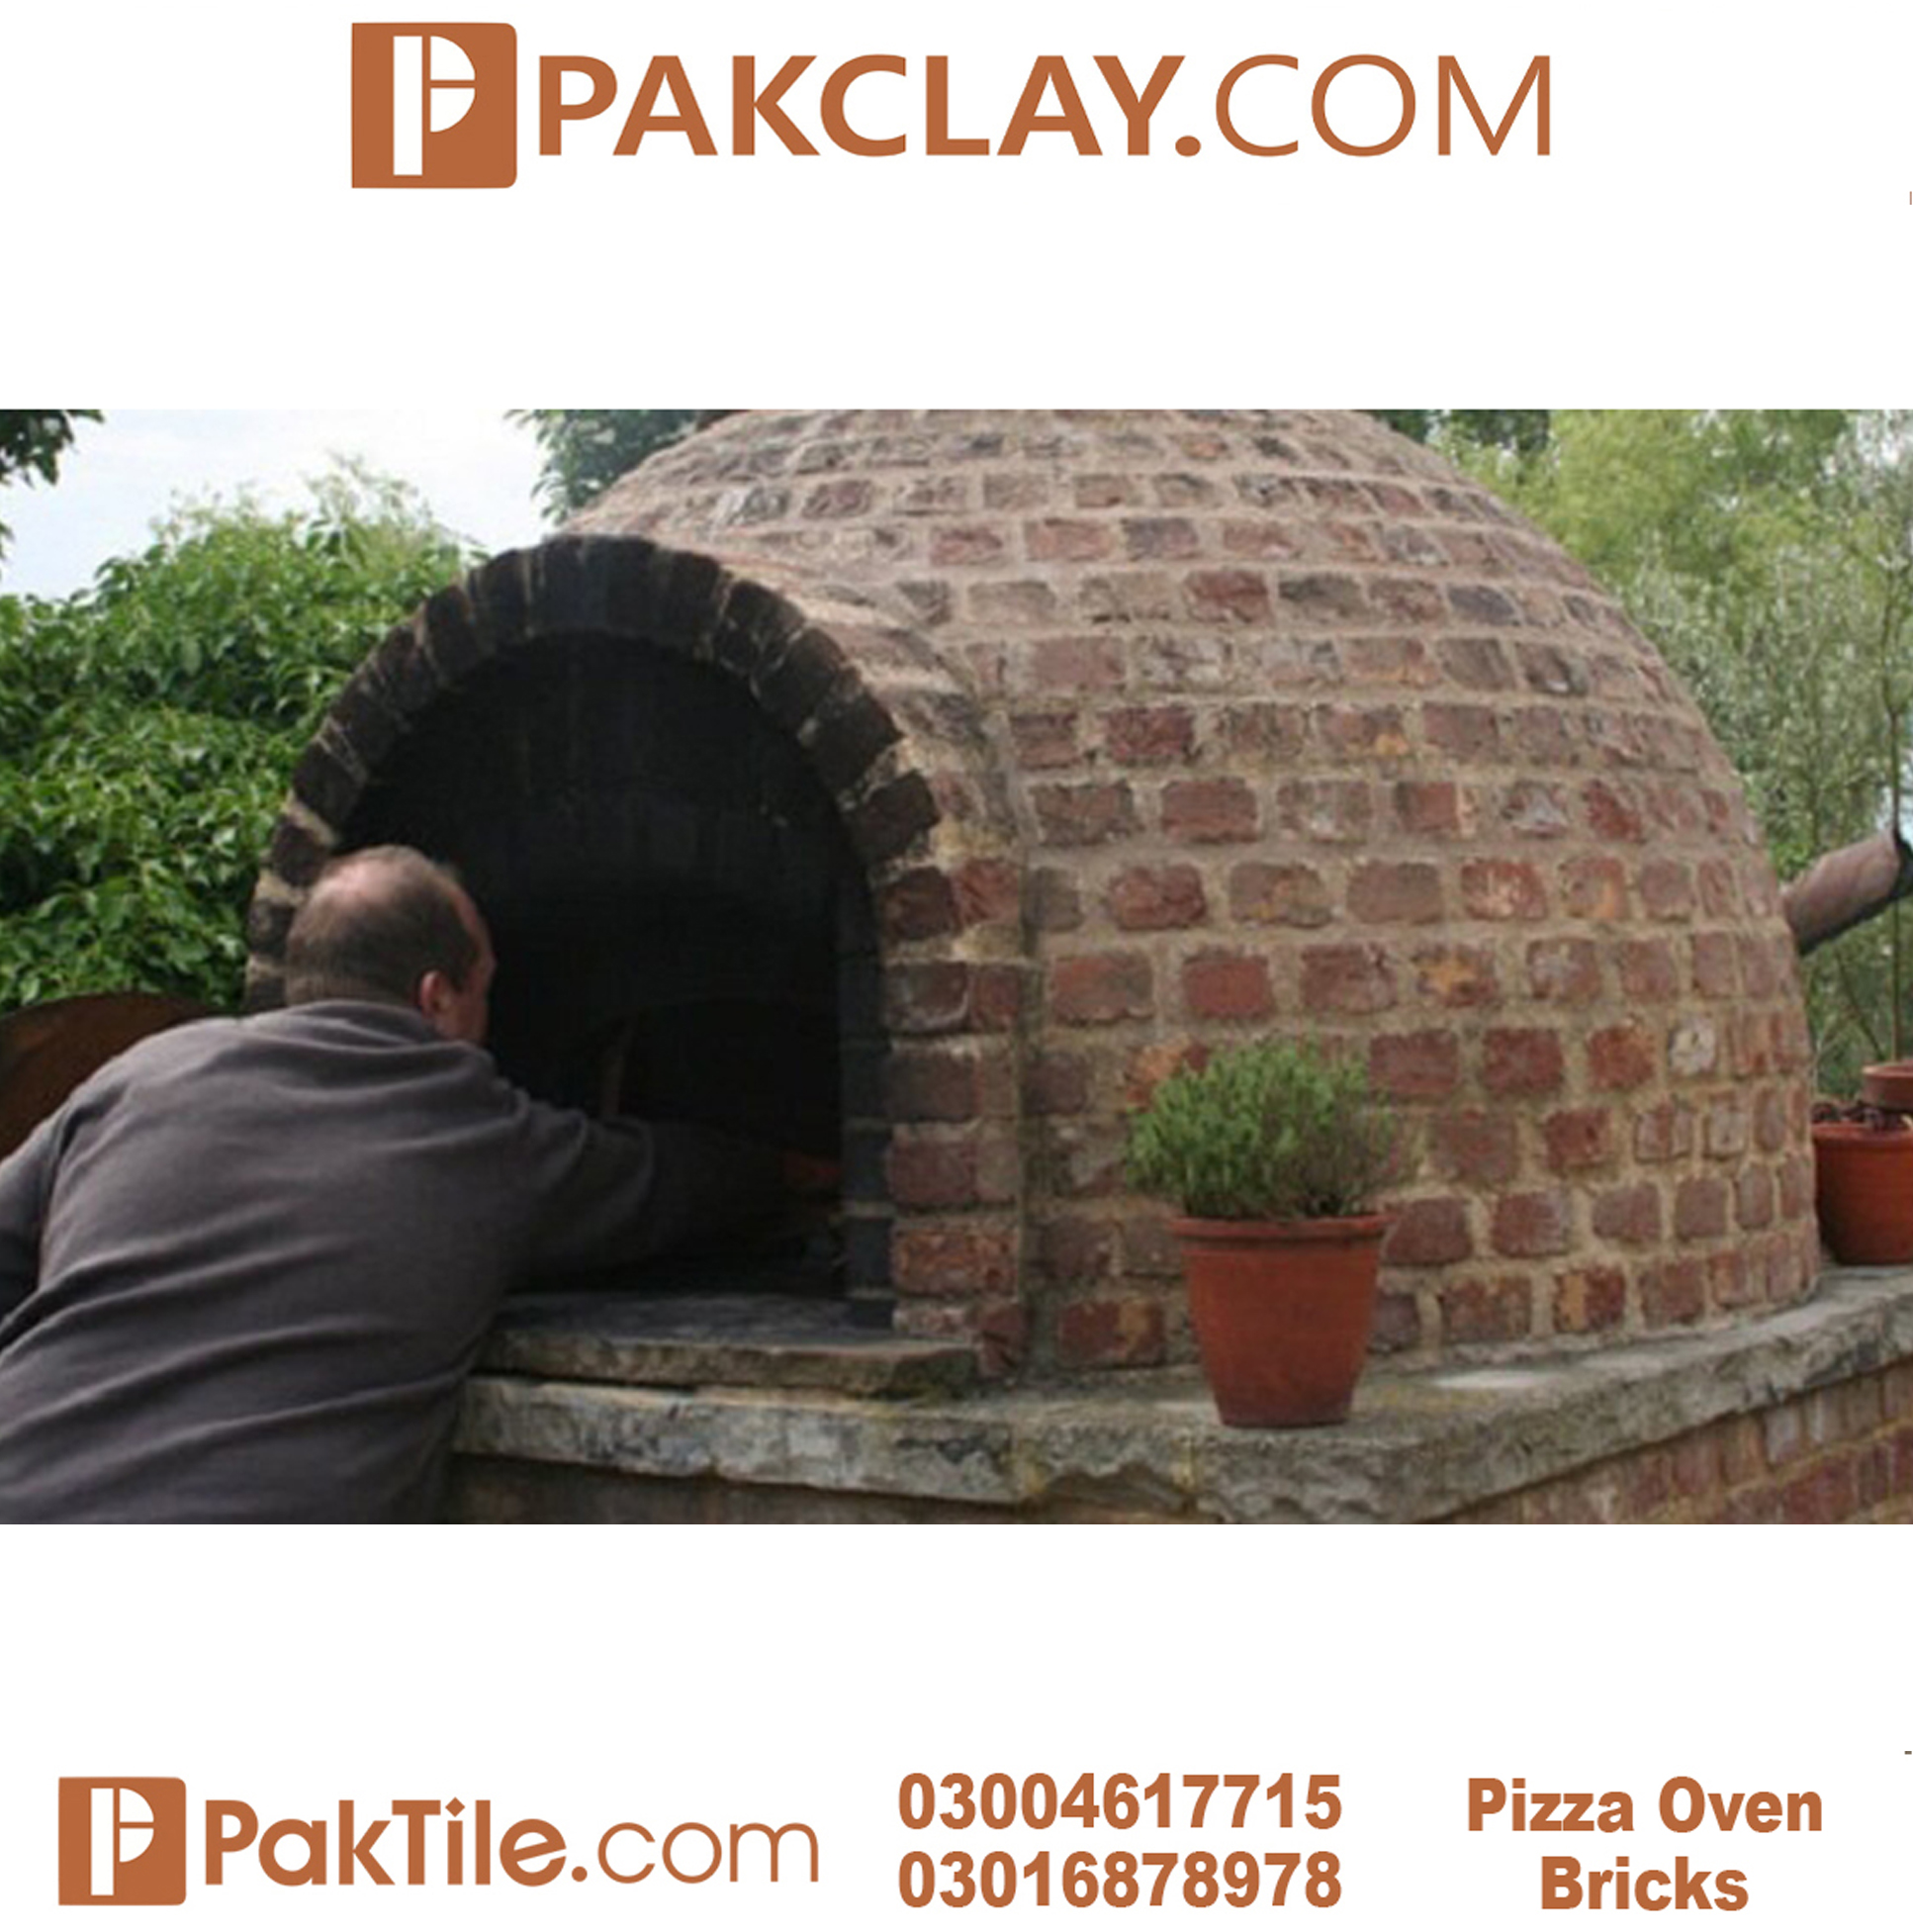 Outdoor Pizza Oven Price